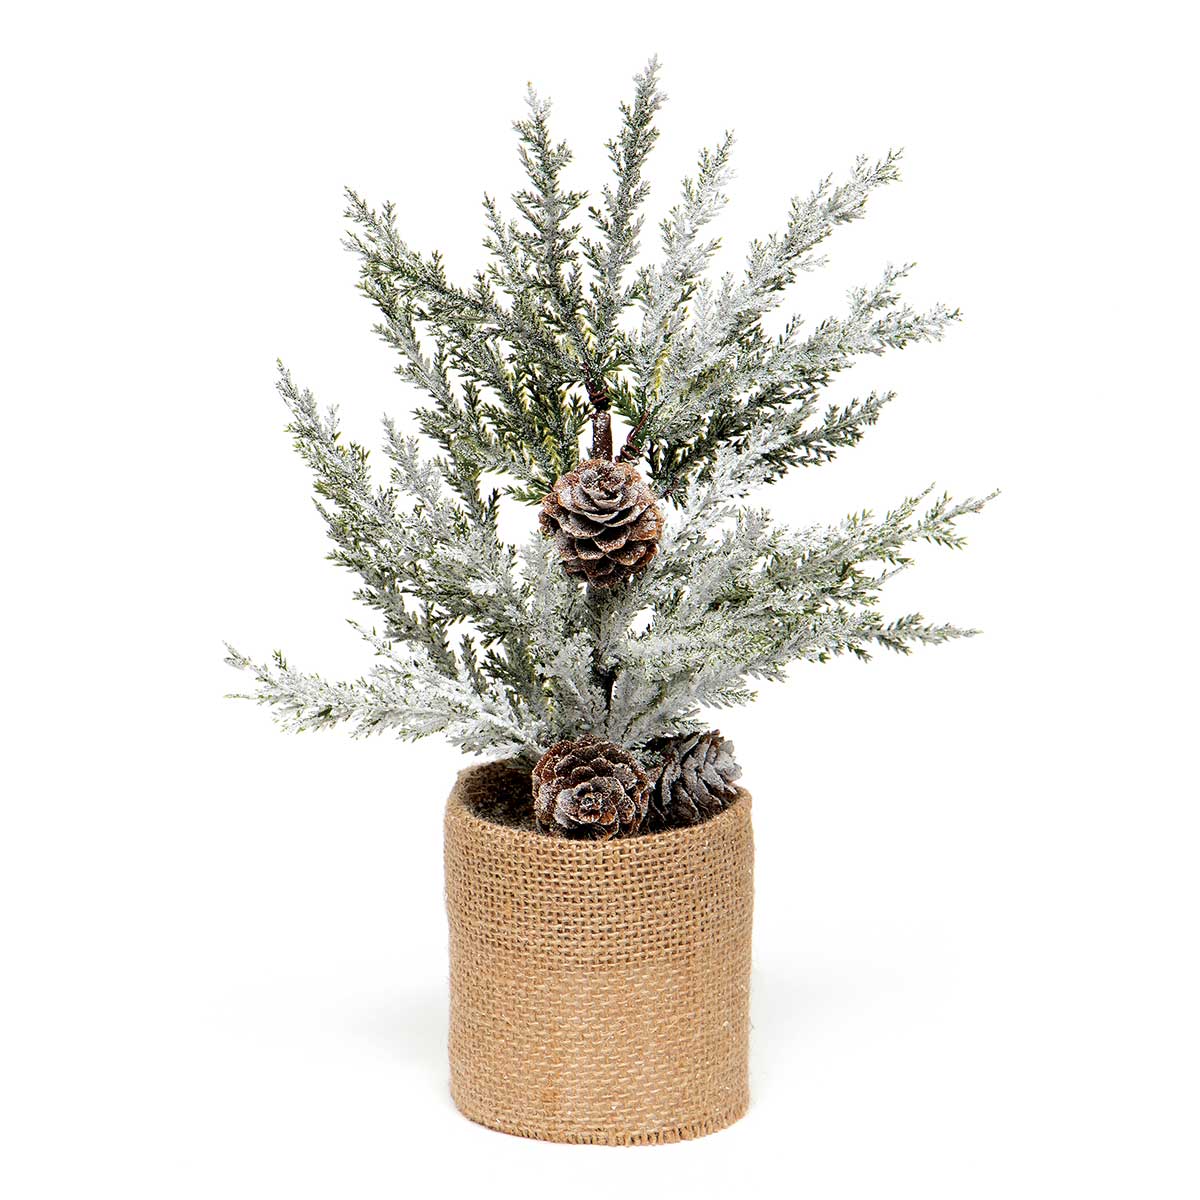 EVERGREEN PINE TREE IN BURLAP BASE WITH SNOW